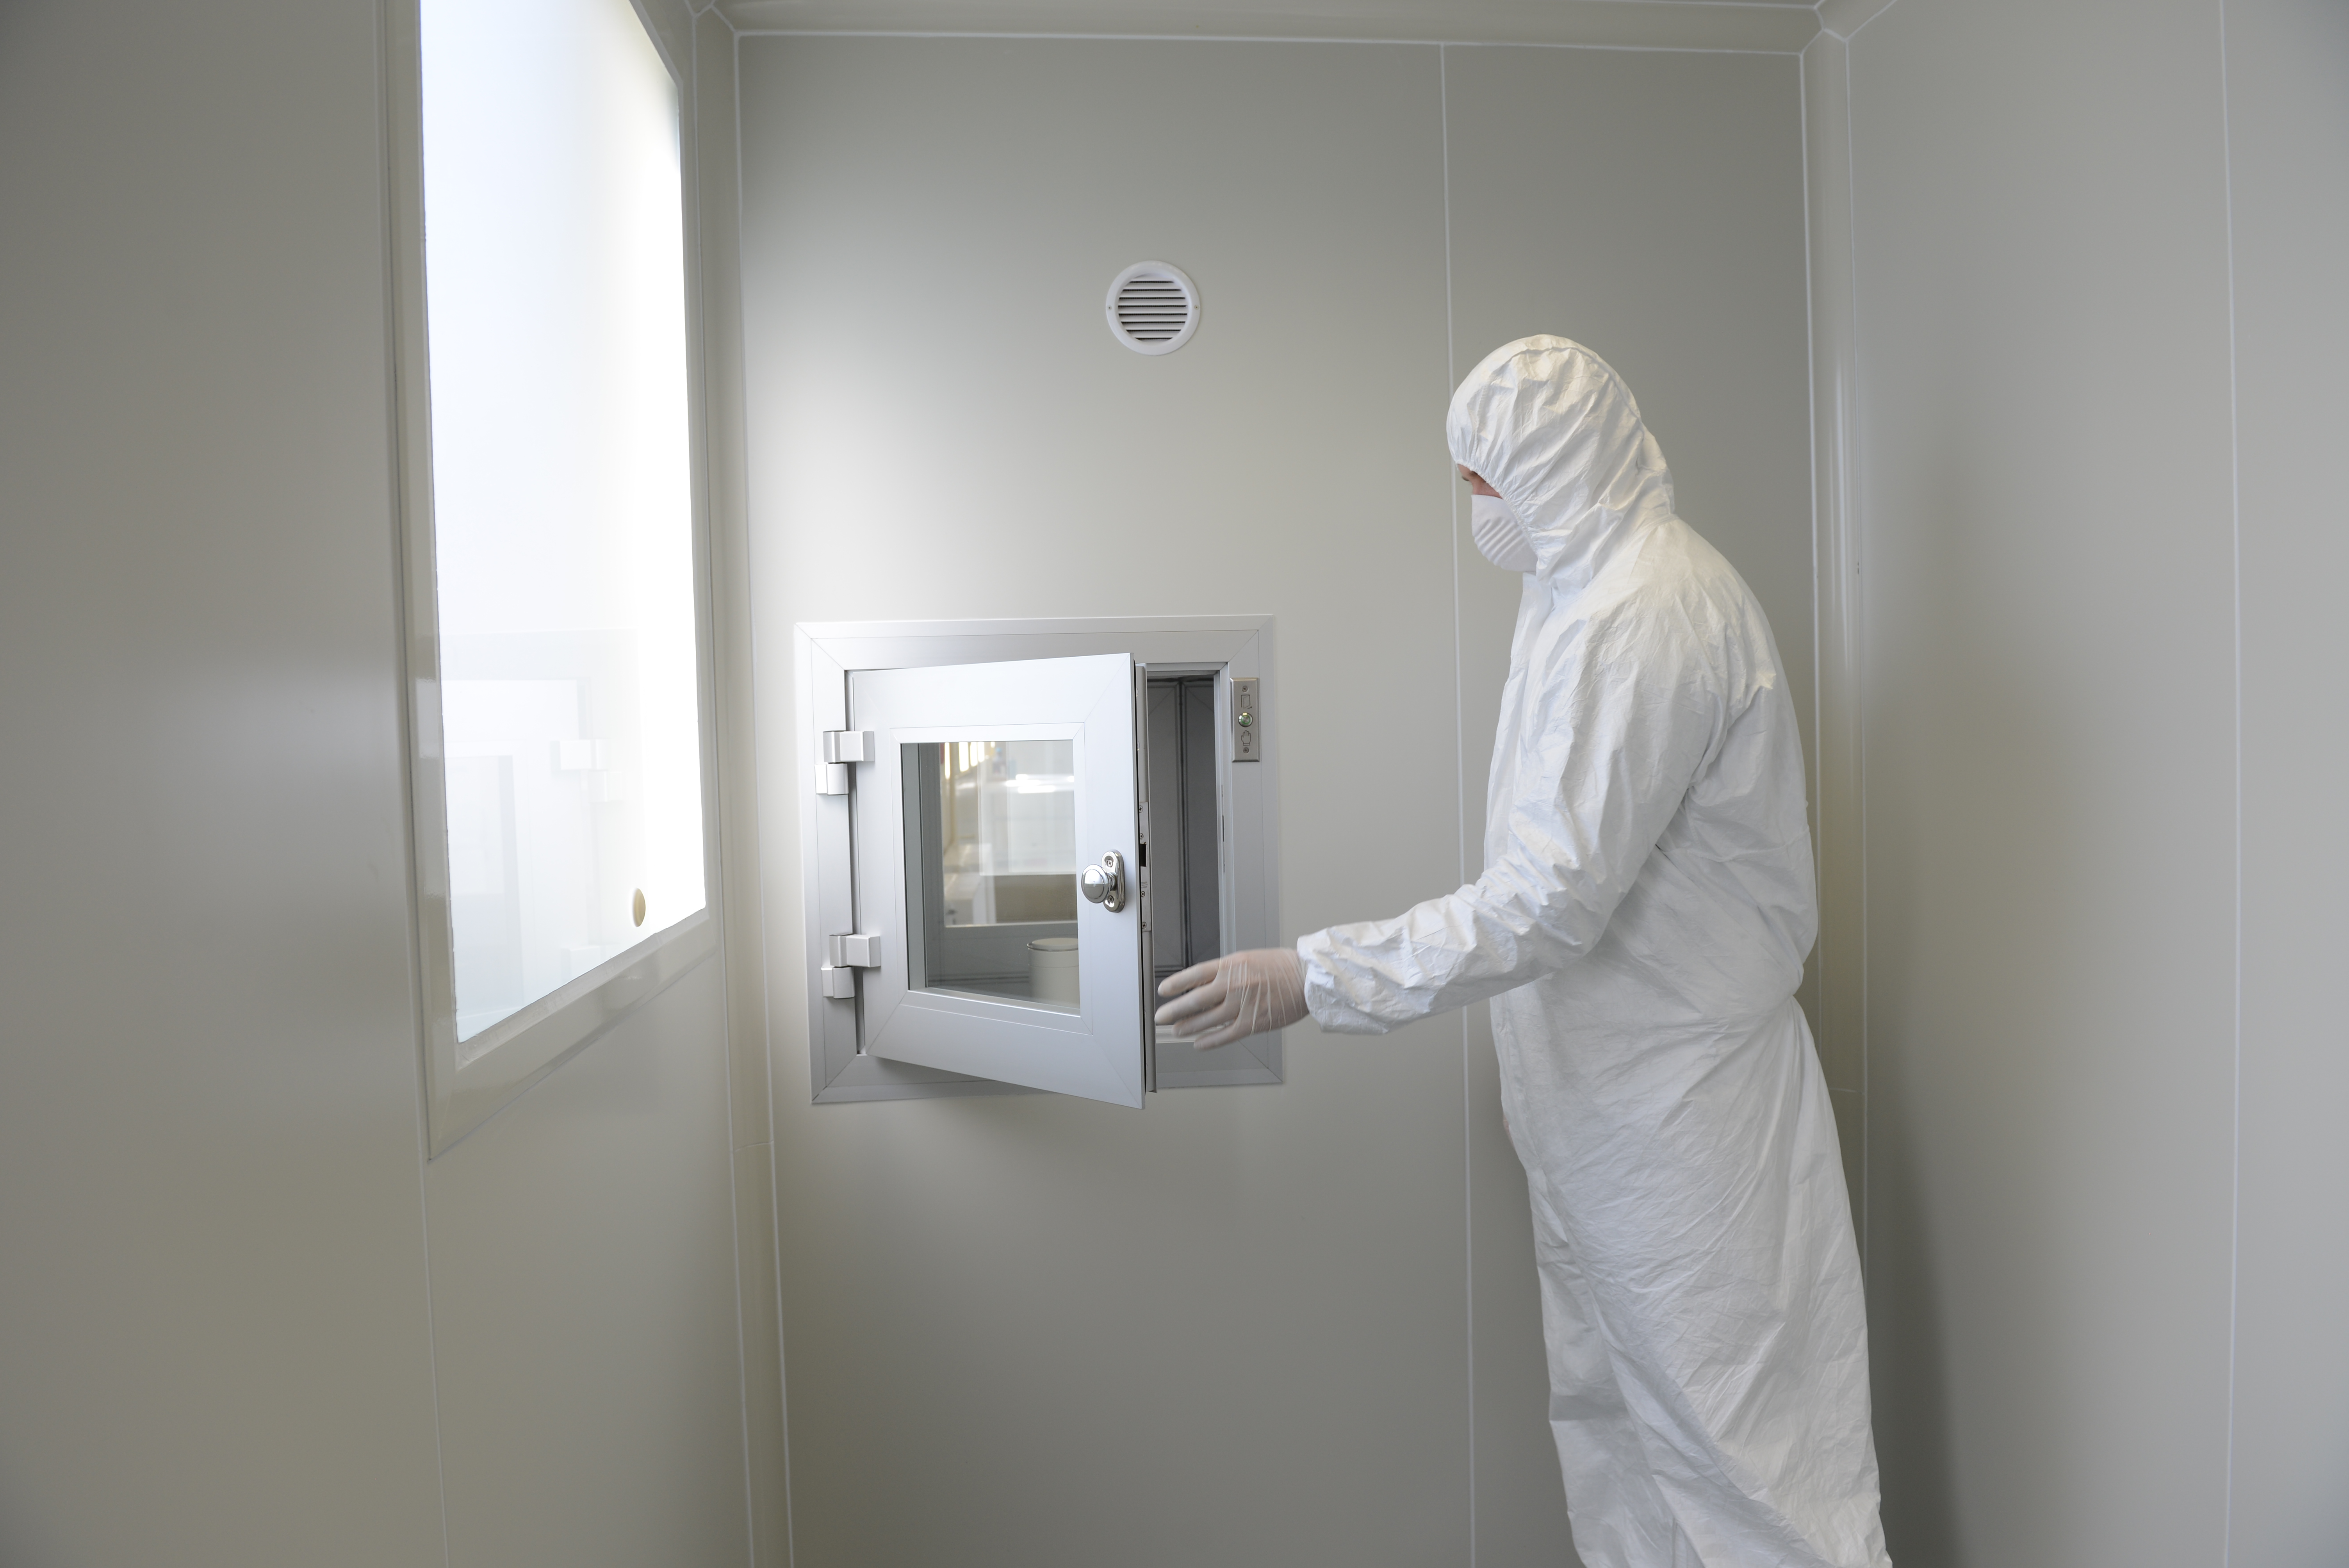 Kleanlabs: All types of cleanroom pass boxes explained